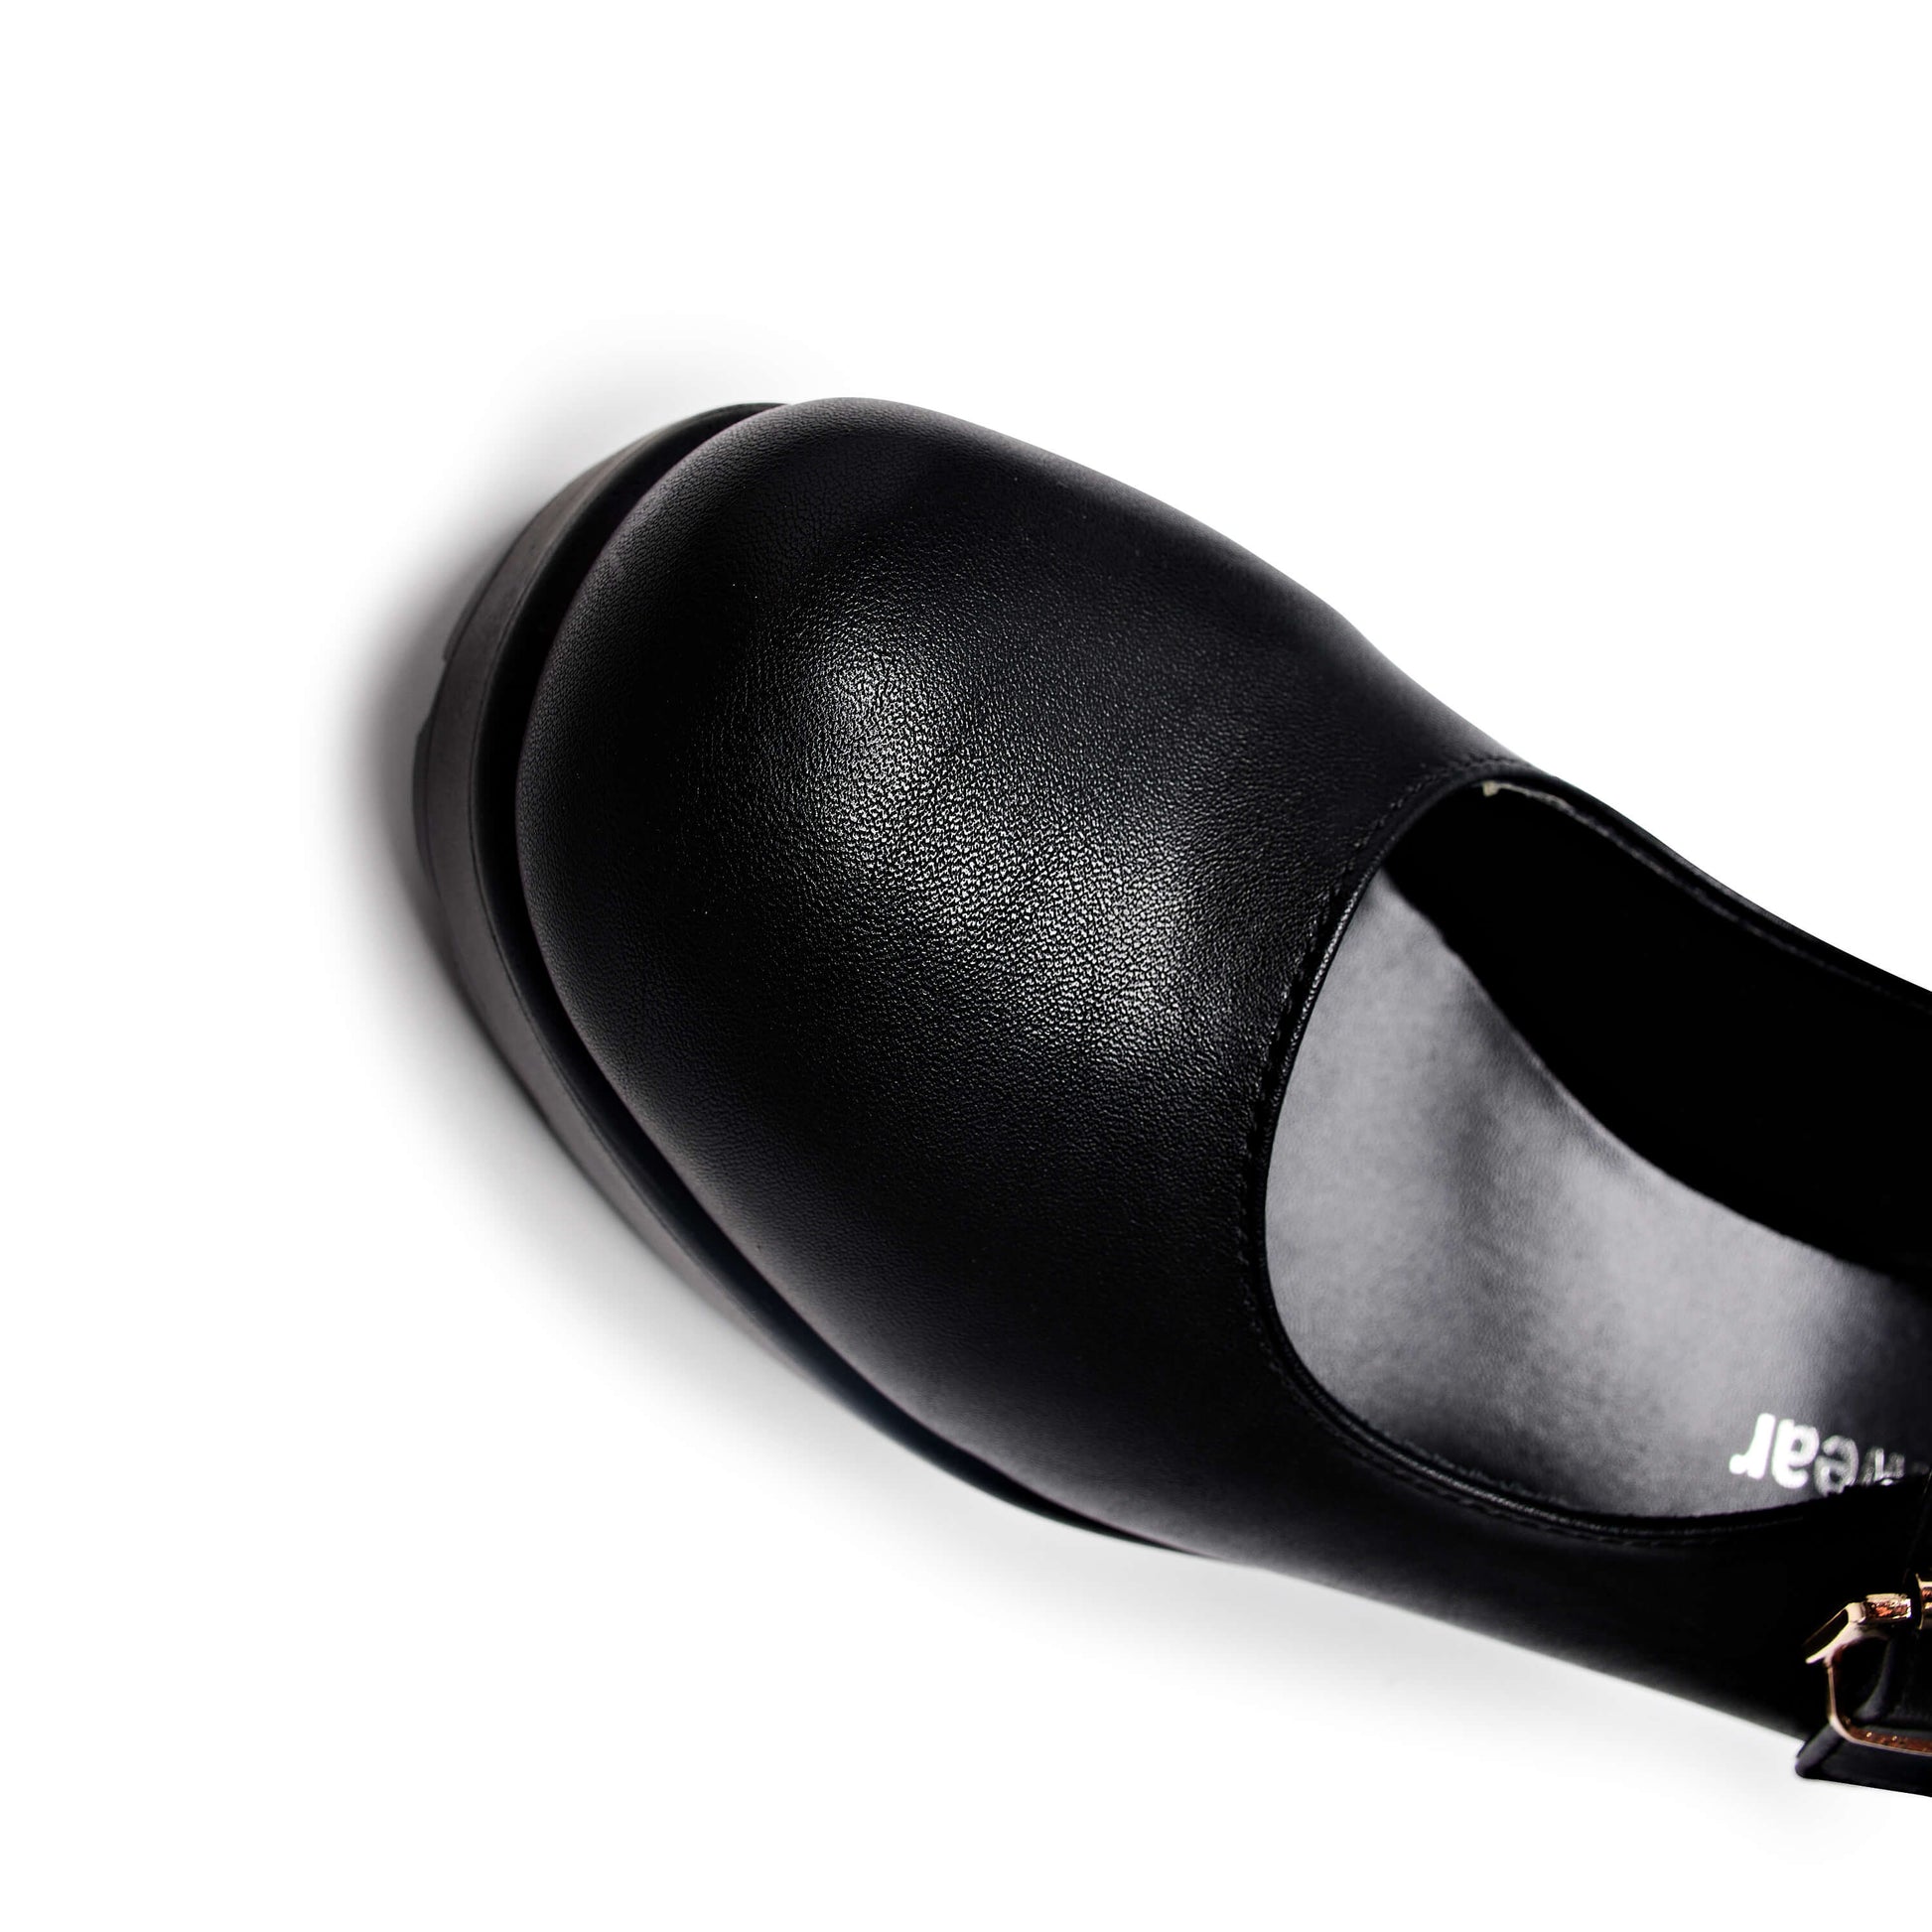 Tira Mary Jane Shoes 'Faux Leather Edition' - Mary Janes - KOI Footwear - Black - Top Detail